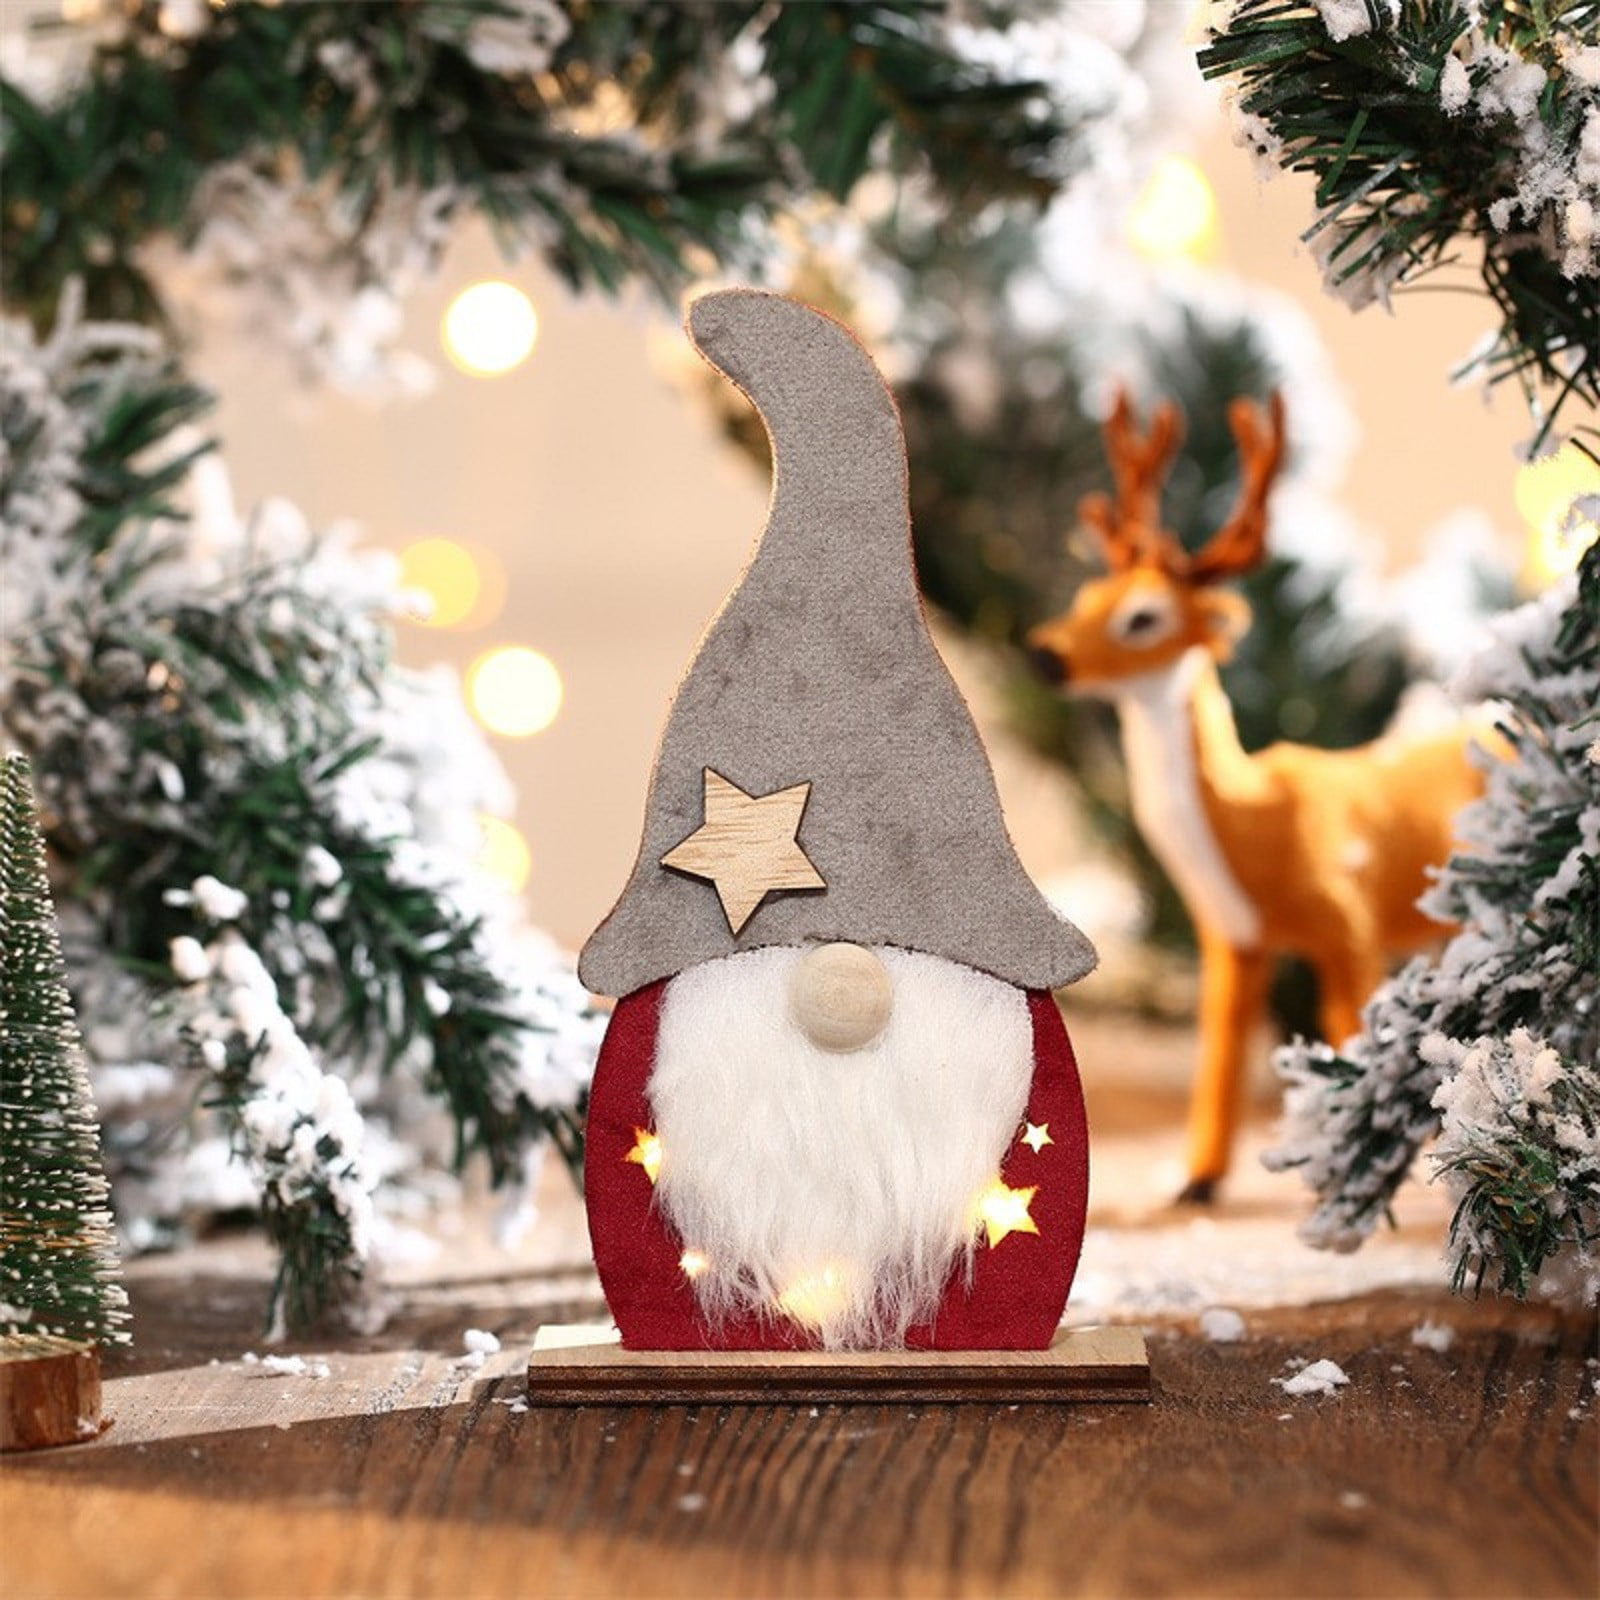 Details about   Merry Christmas Mini Resin LED Light House Xmas Tree Ornament Family Decor Gifts 